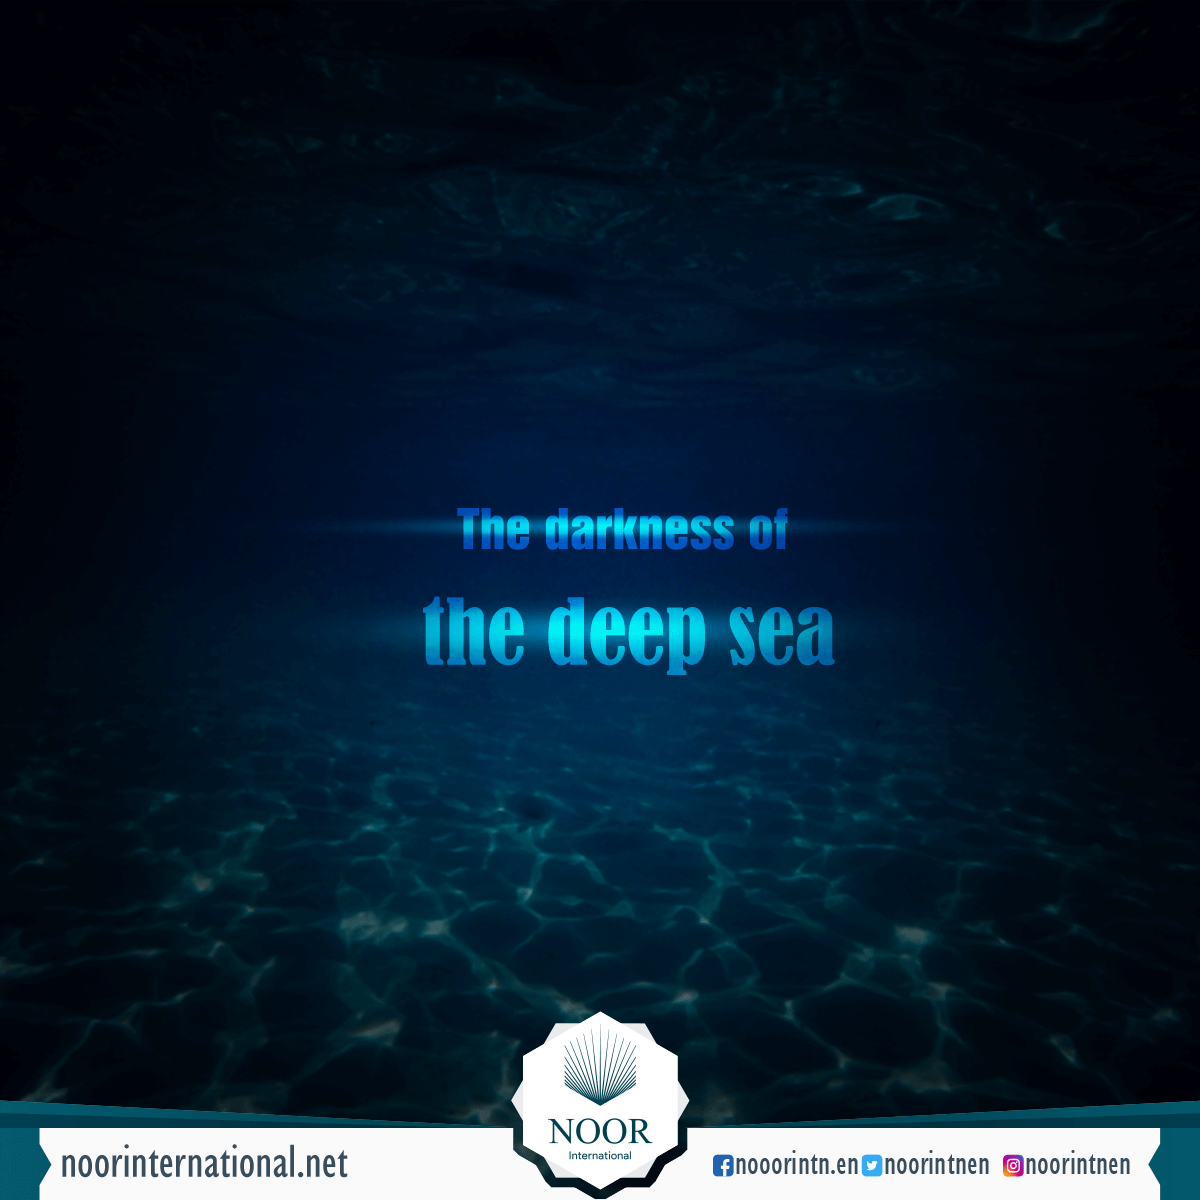 The darkness of the deep sea